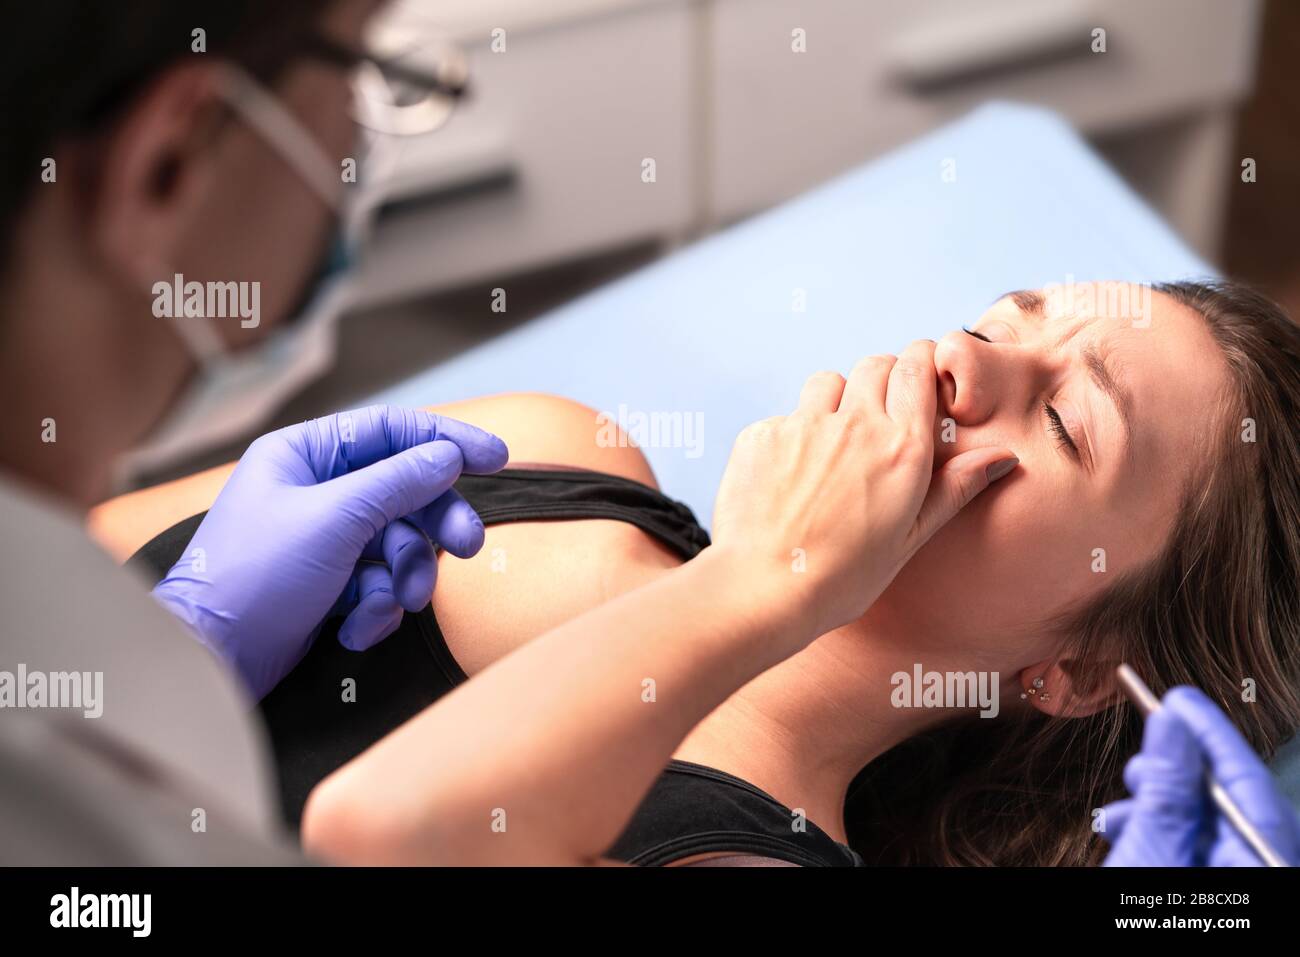 Upset patient having panic attack. Afraid of dentist or fear of doctor. Nervous woman covering mouth. Malpractice or wrong medical treatment. Stock Photo